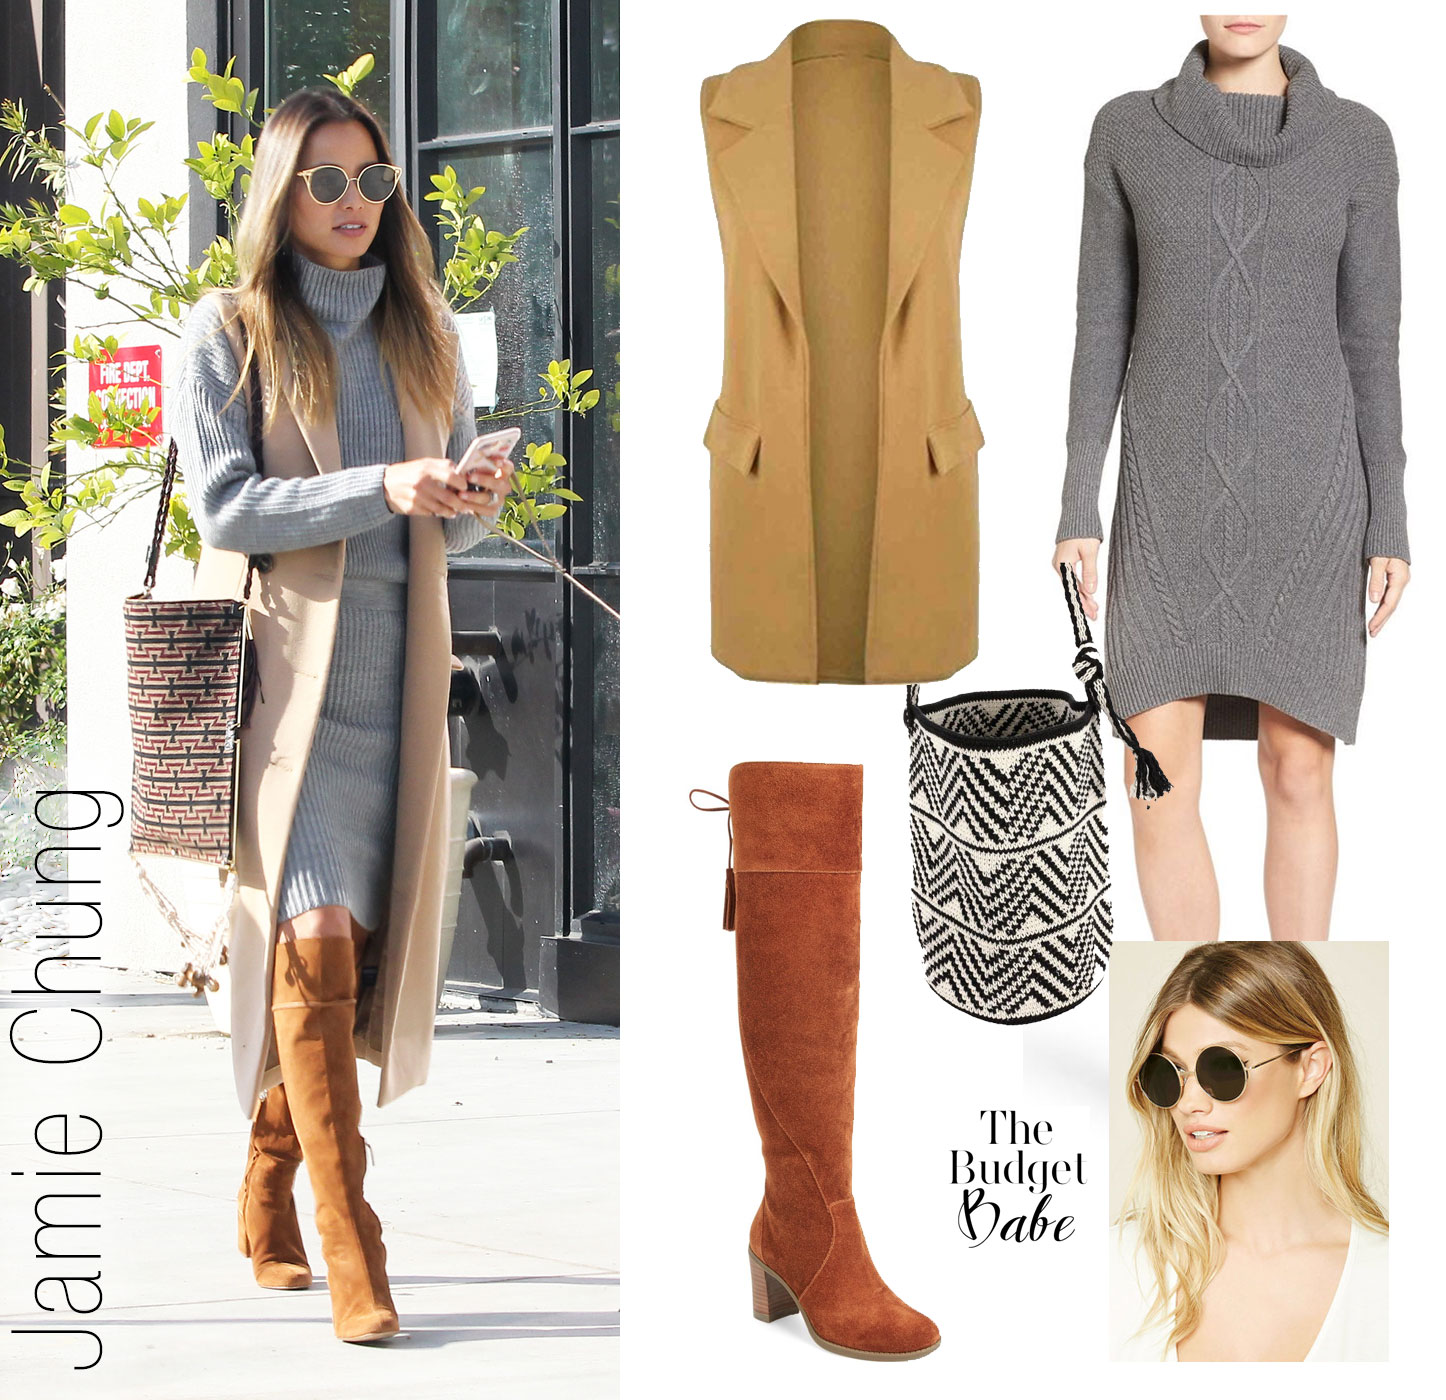 Recreate Jamie Chung's grey sweaterdress and camel vest look for less.